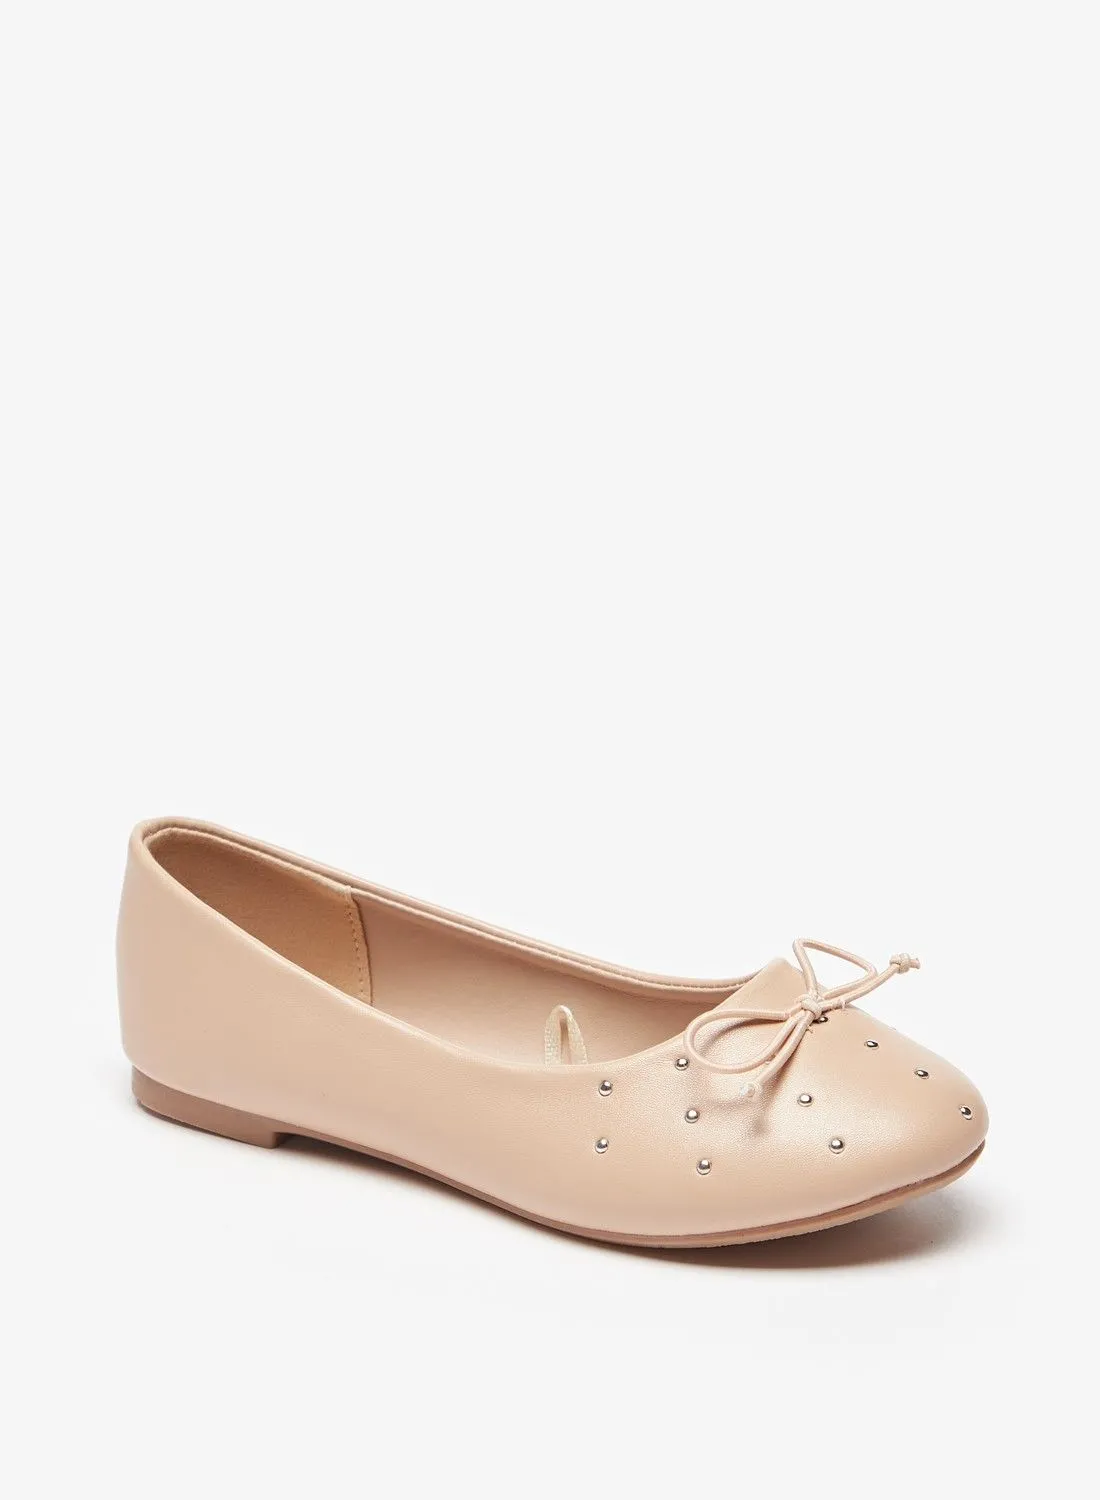 Flora Bella Embellished Slip On Ballerina Shoes with Bow Accent